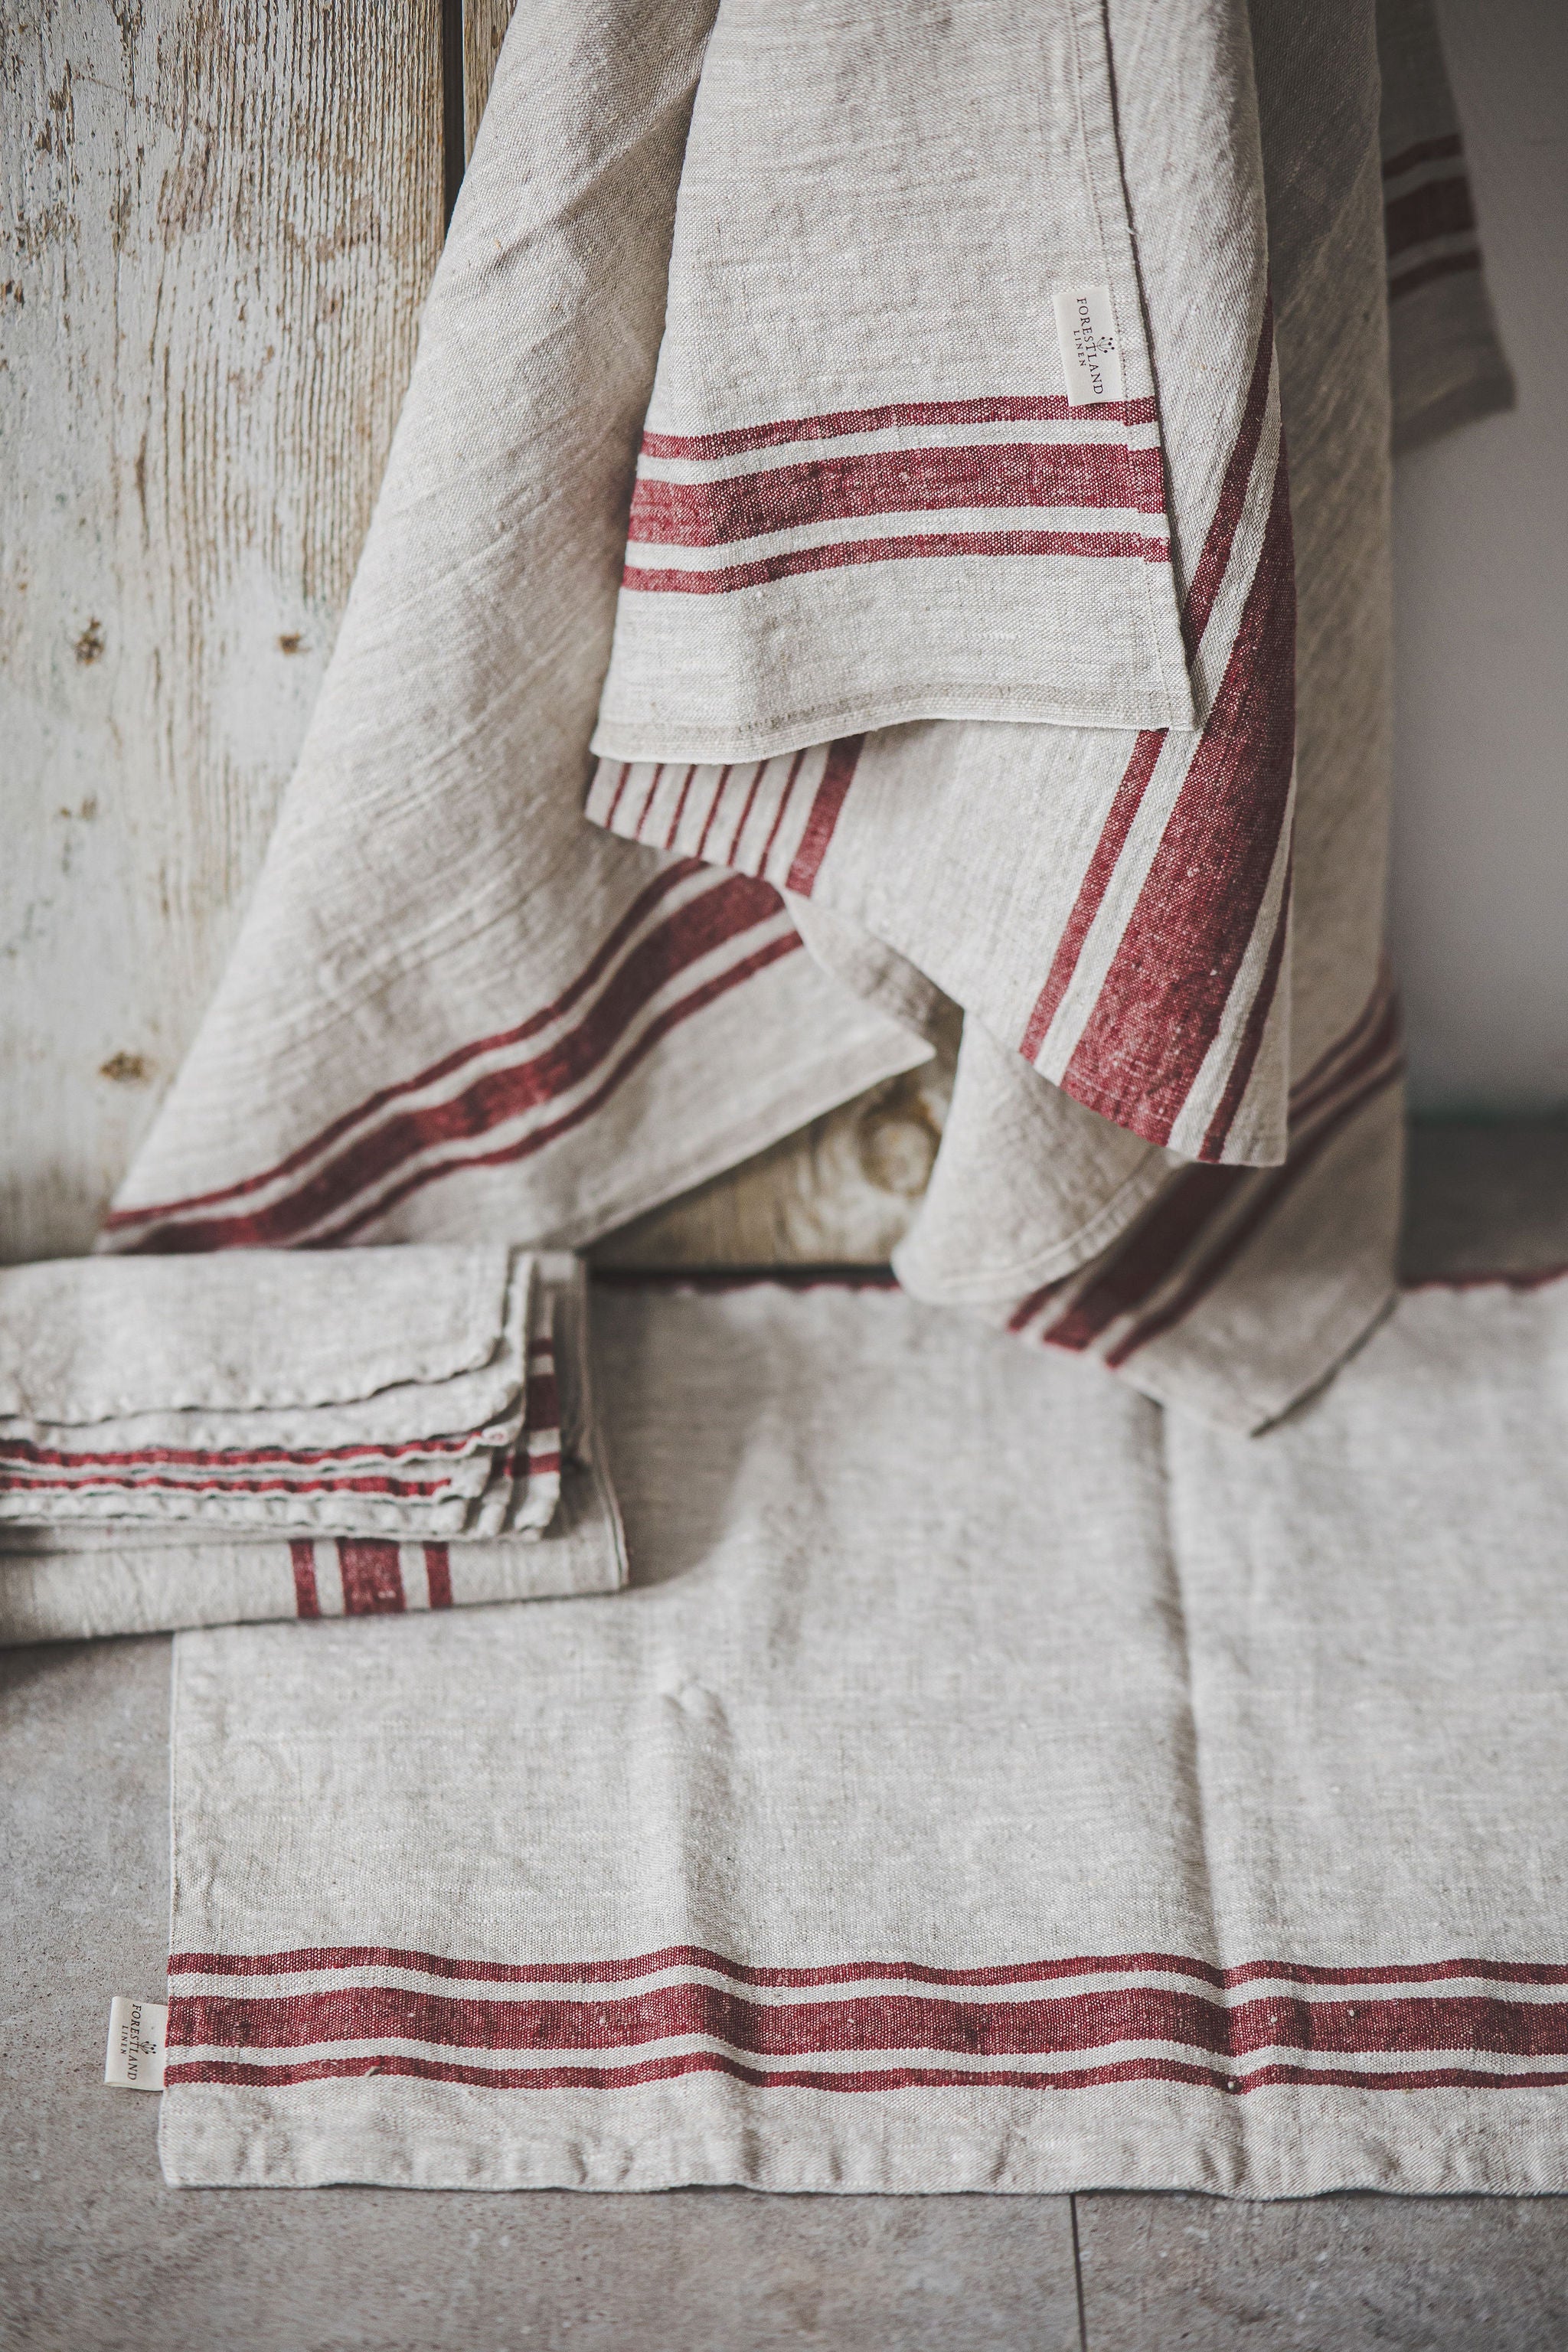 French style linen bath mat with cherry red stripes